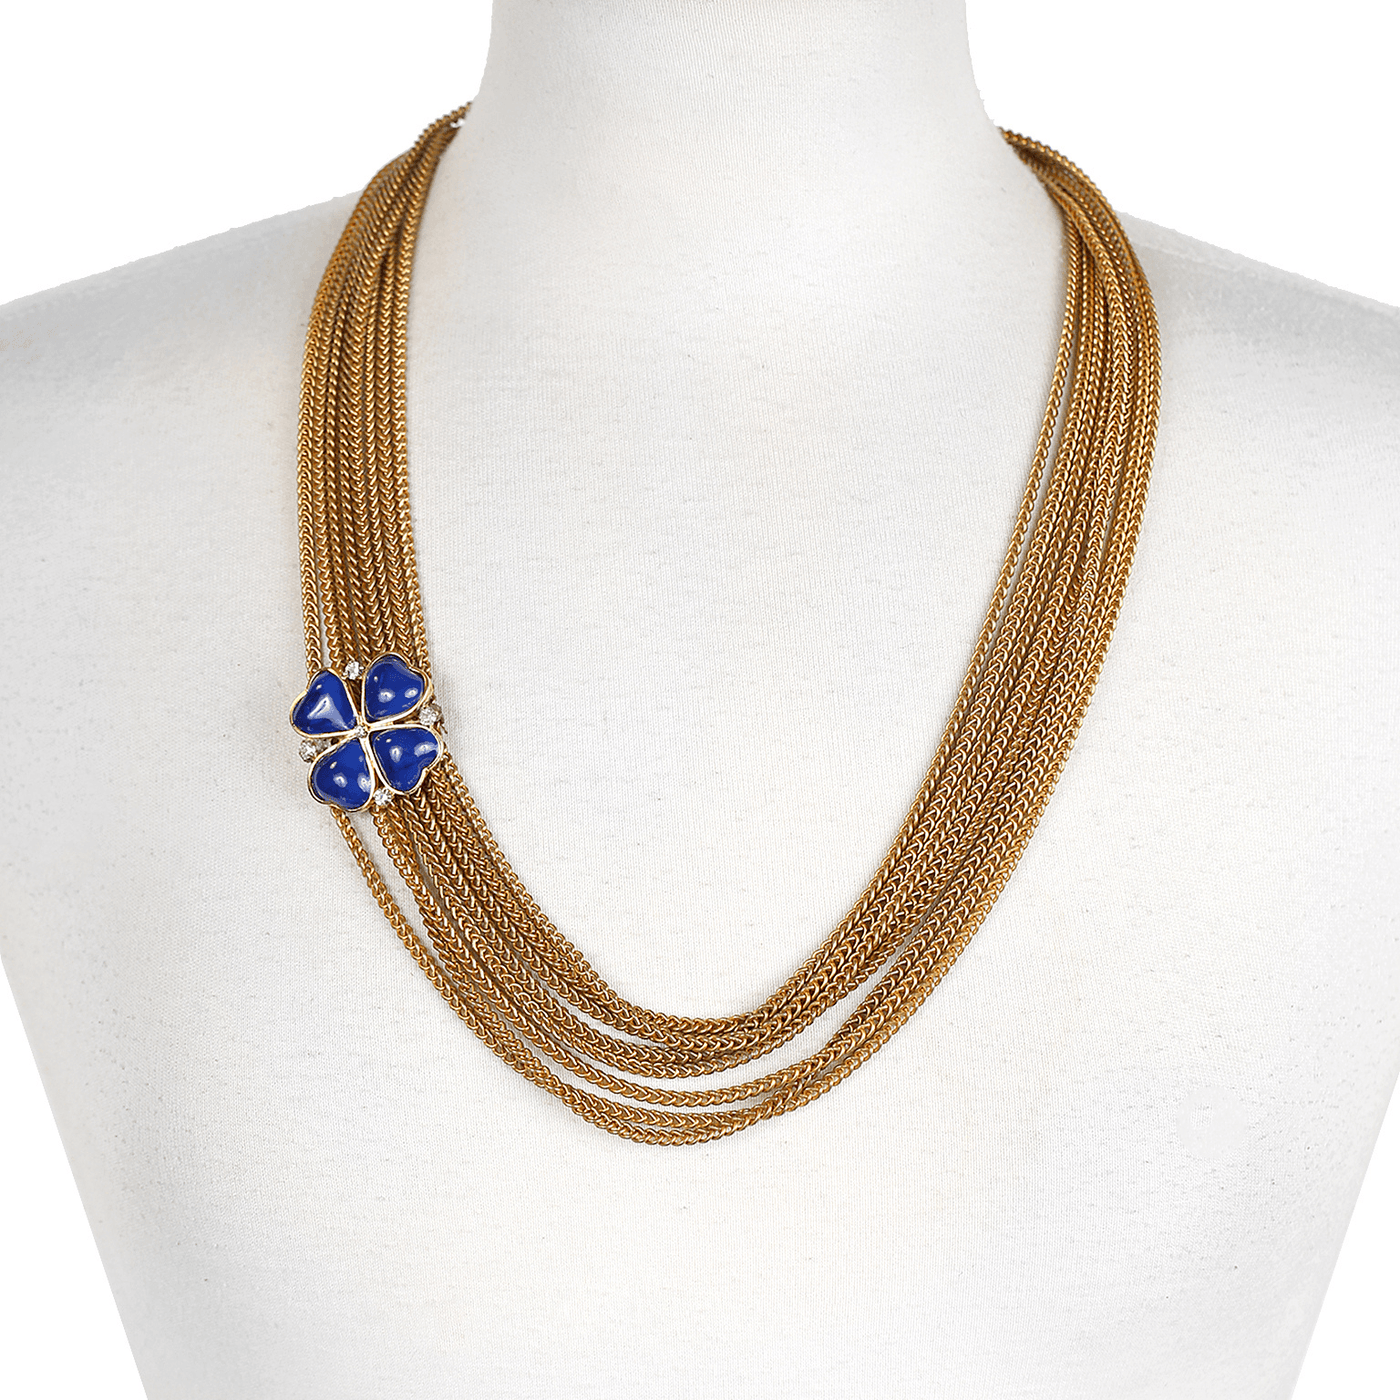 Chanel Blue Clover Gold Multi Chain Necklace - Only Authentics